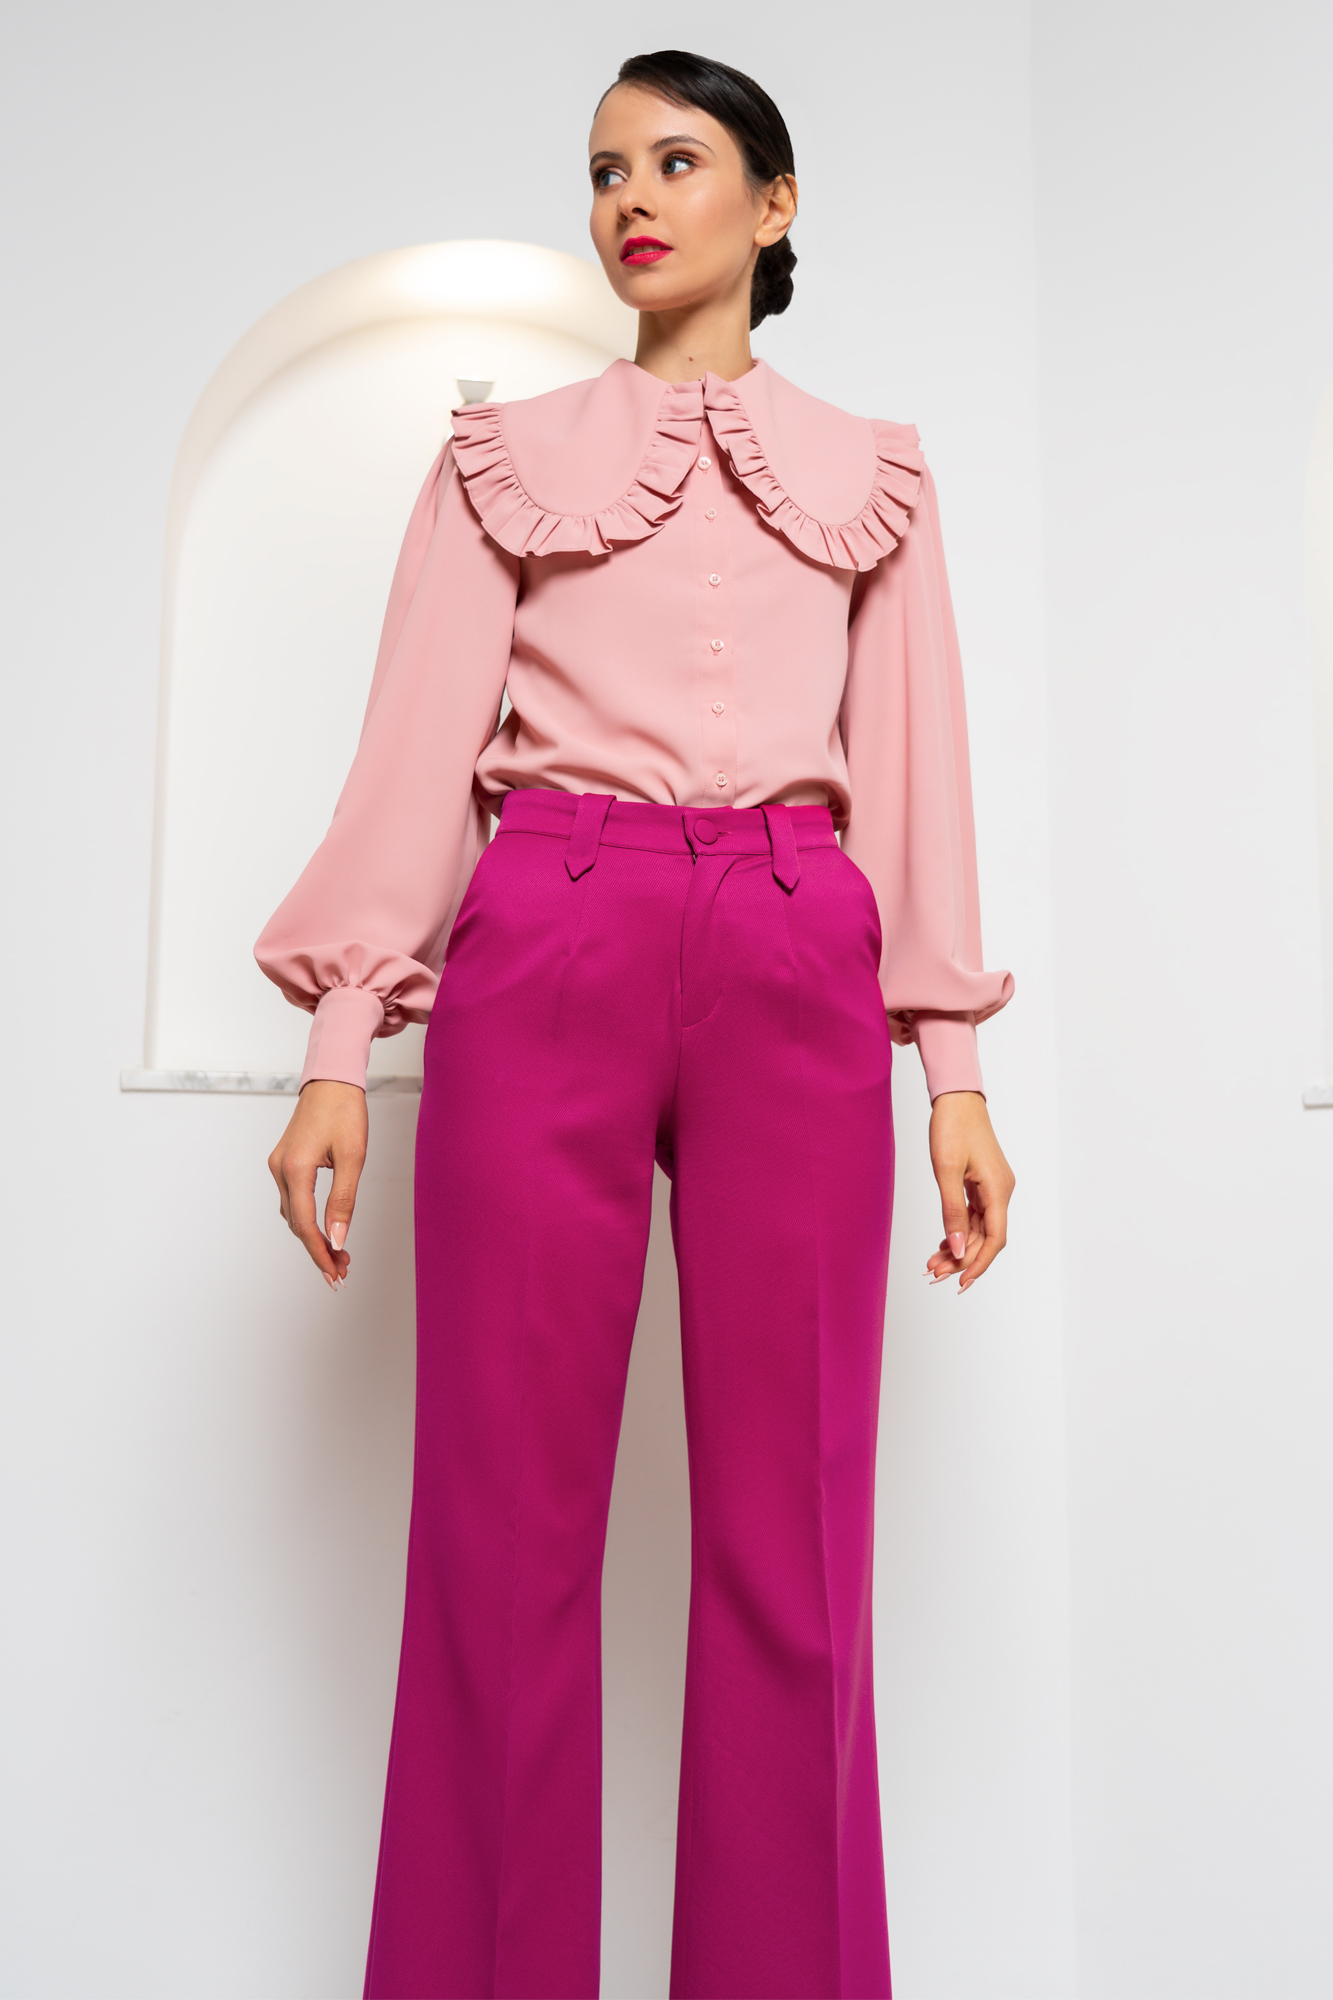 Glamorous Shirt In Pink With peter pan frill collar